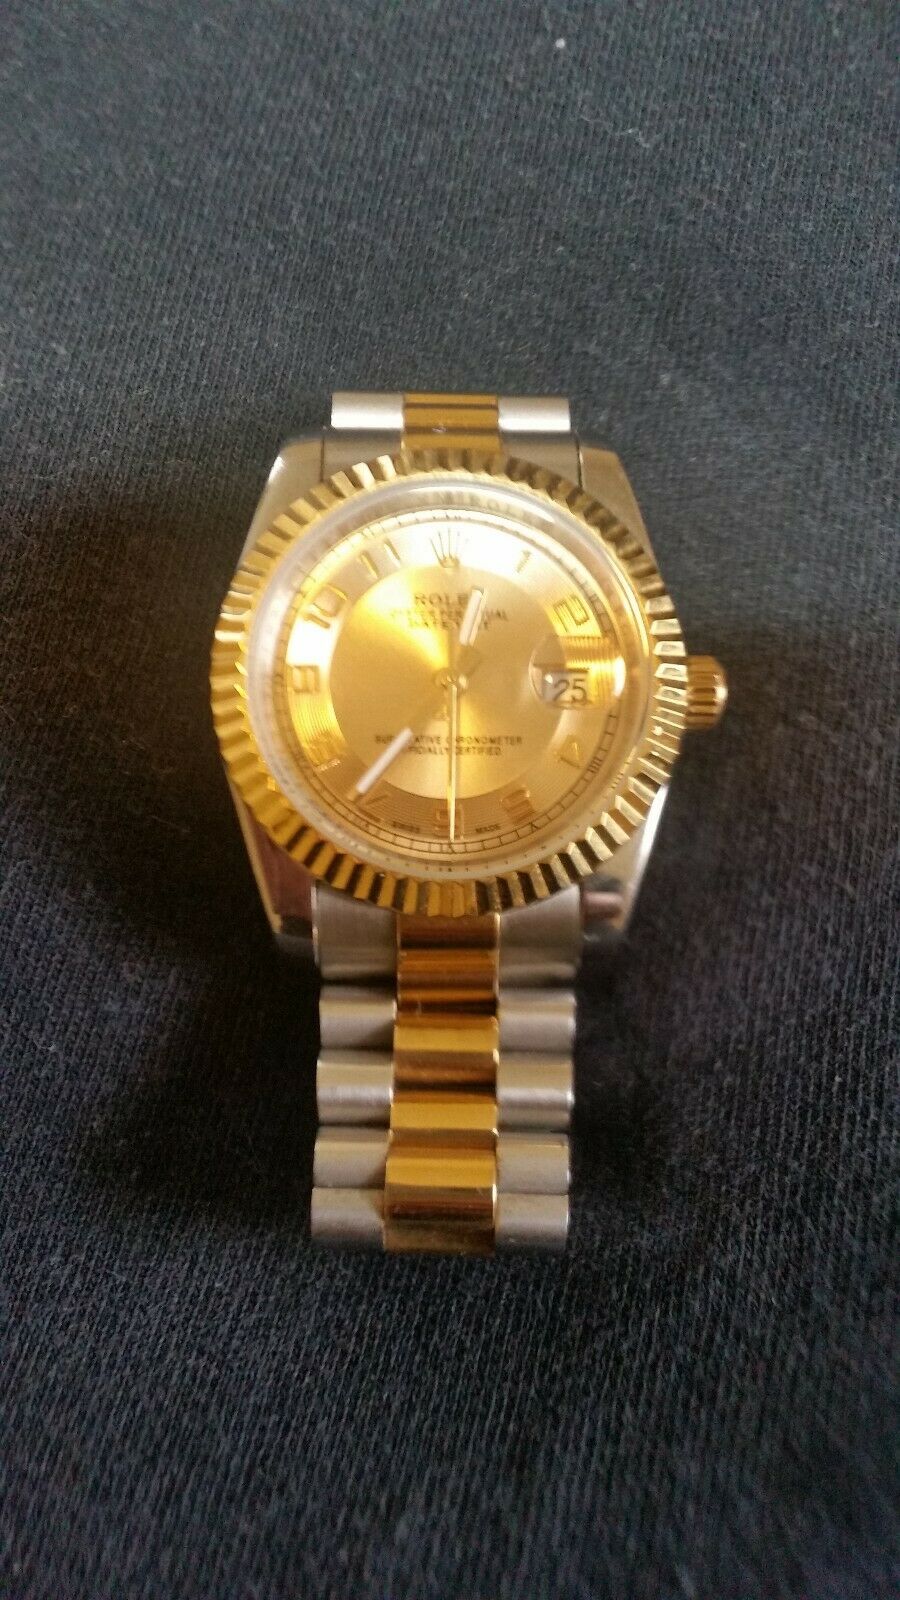 Preowned ROLEX WATCH gold and silver 